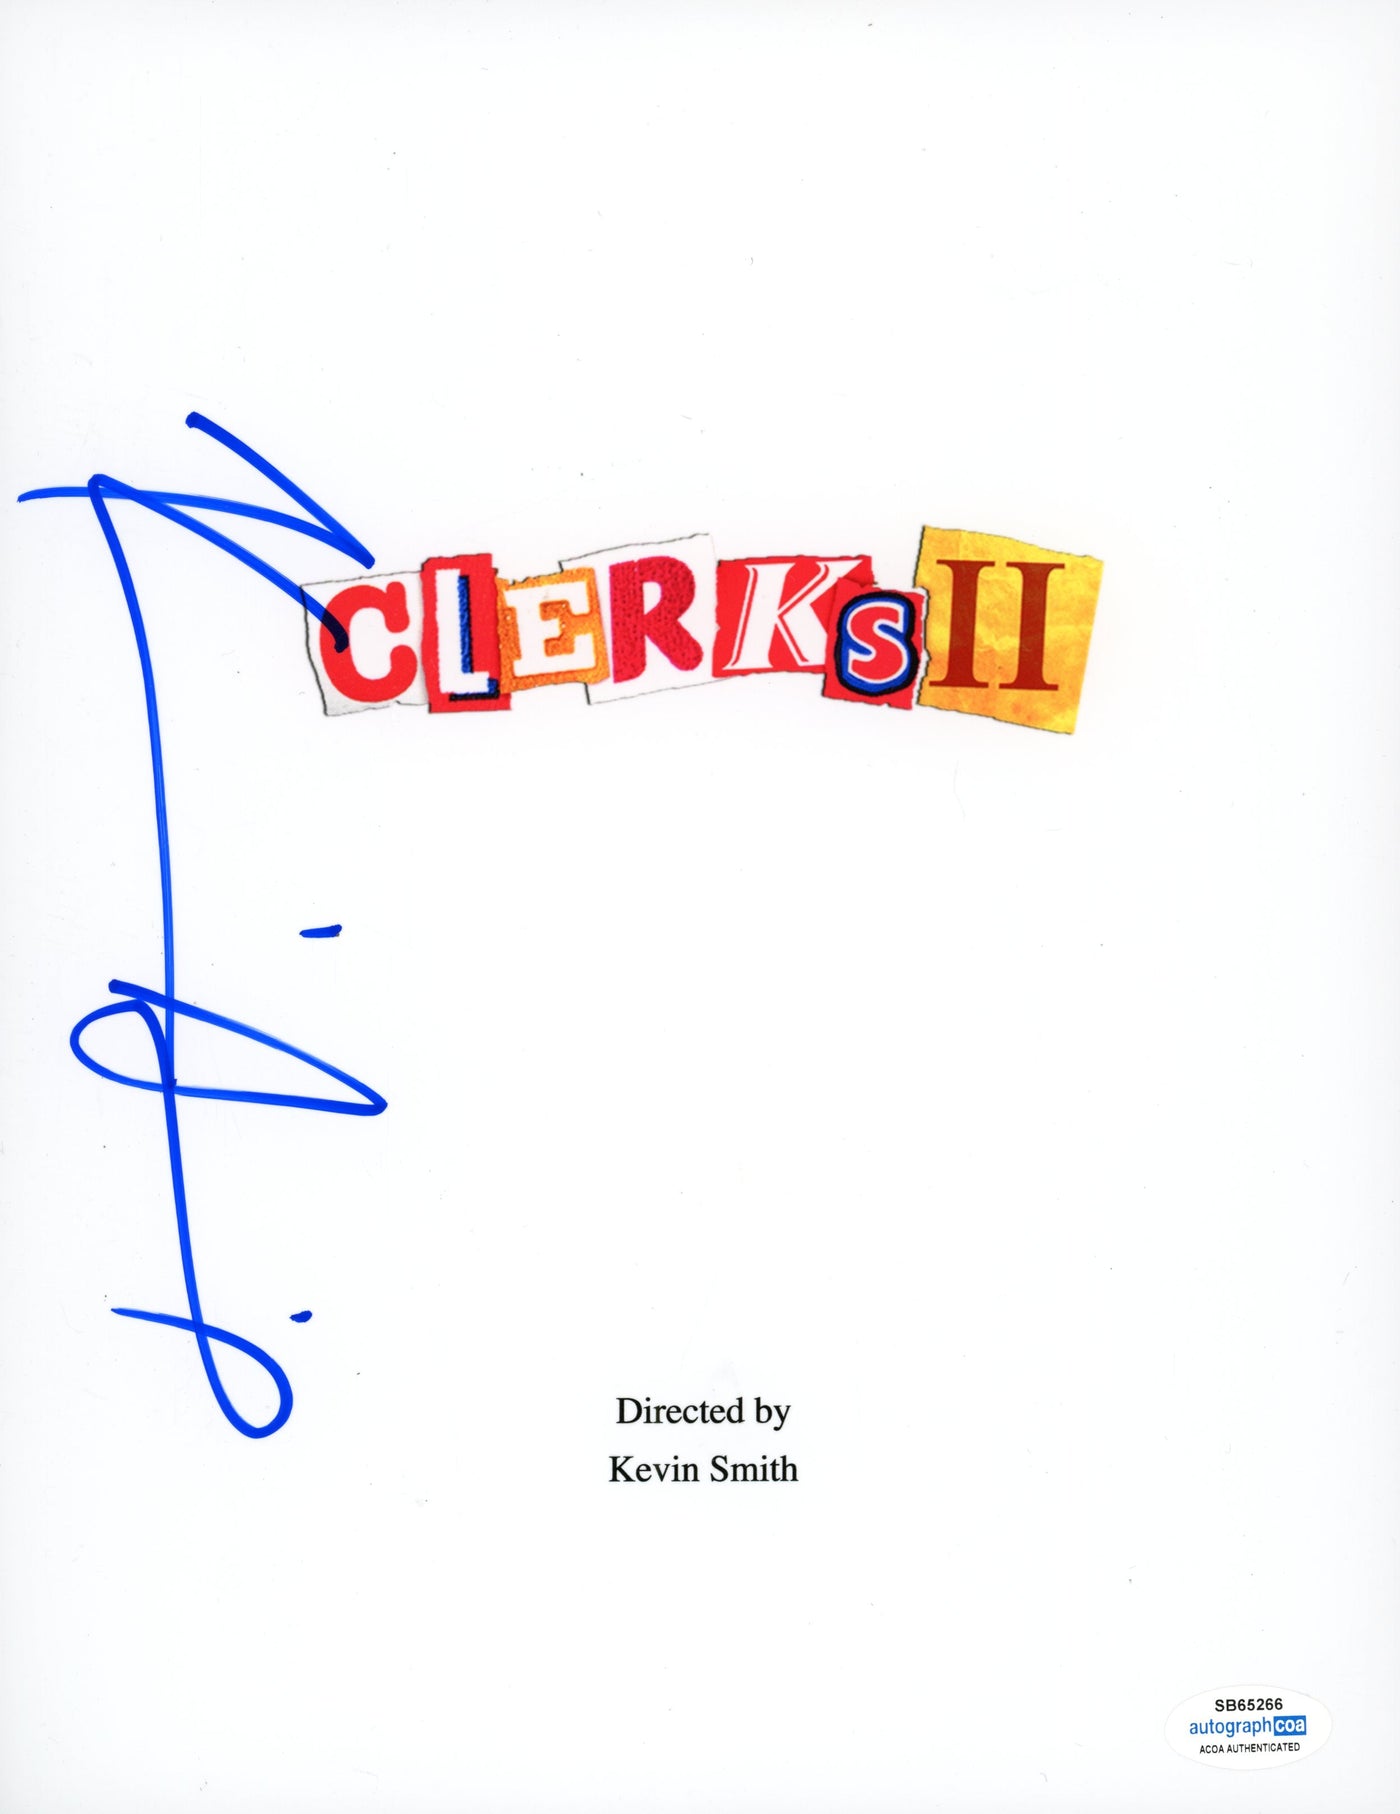 Kevin Smith Signed Clerks II Movie Script Cover Autographed ACOA